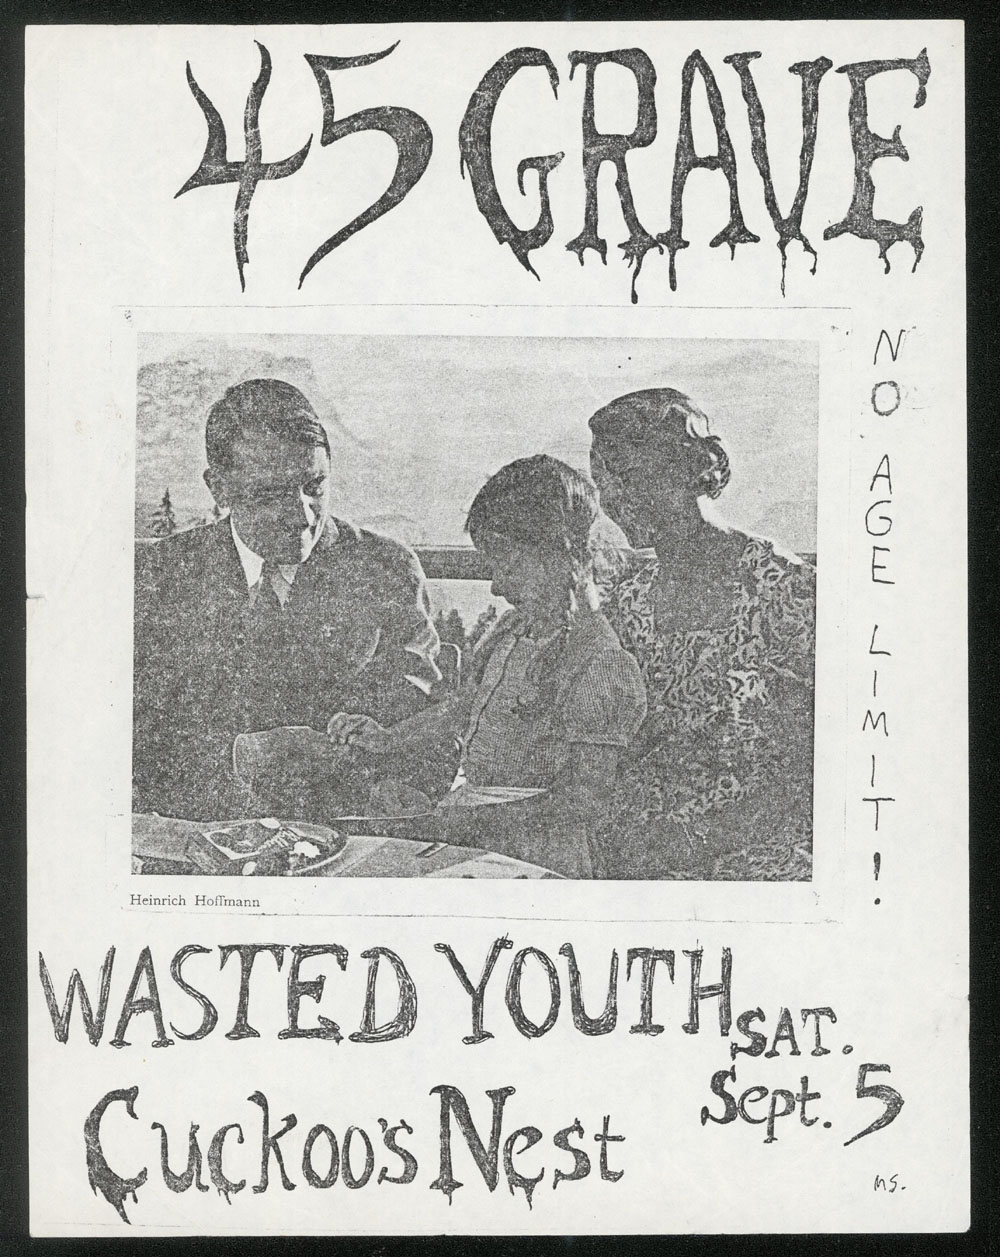 45 GRAVE w/ Wasted Youth at Cuckoo's Nest